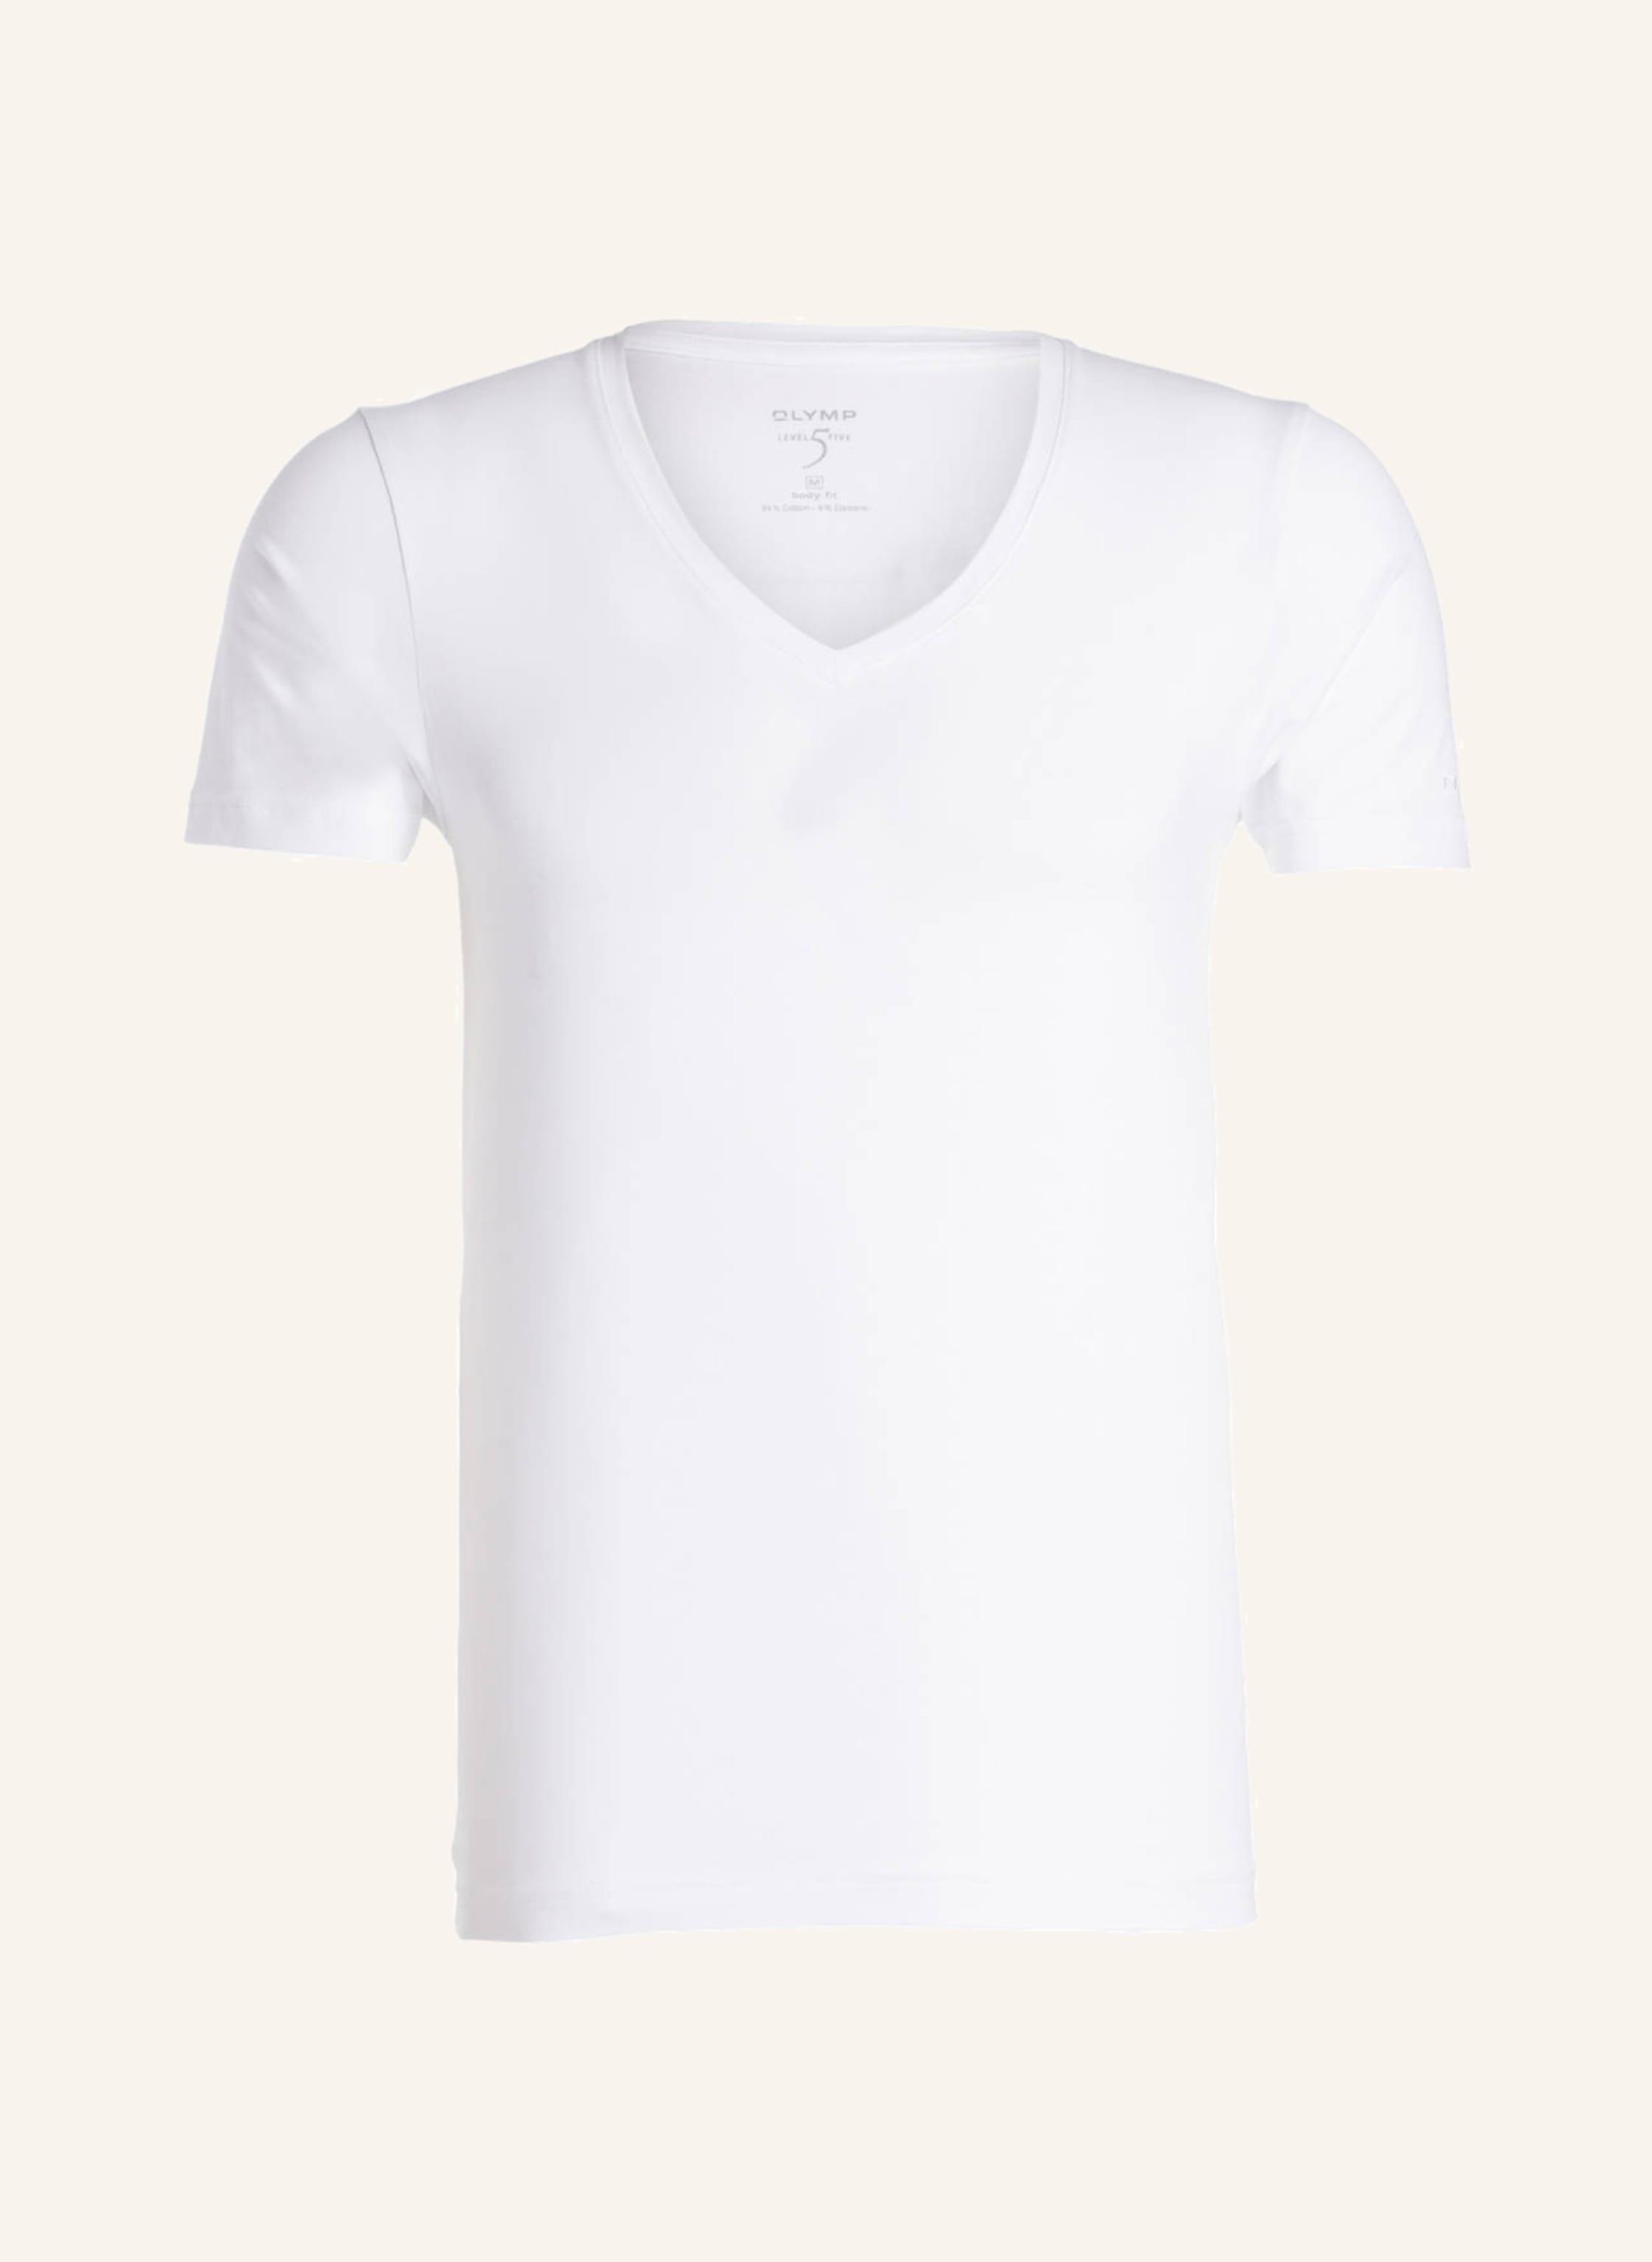 OLYMP T-Shirt Level Five in weiss body fit